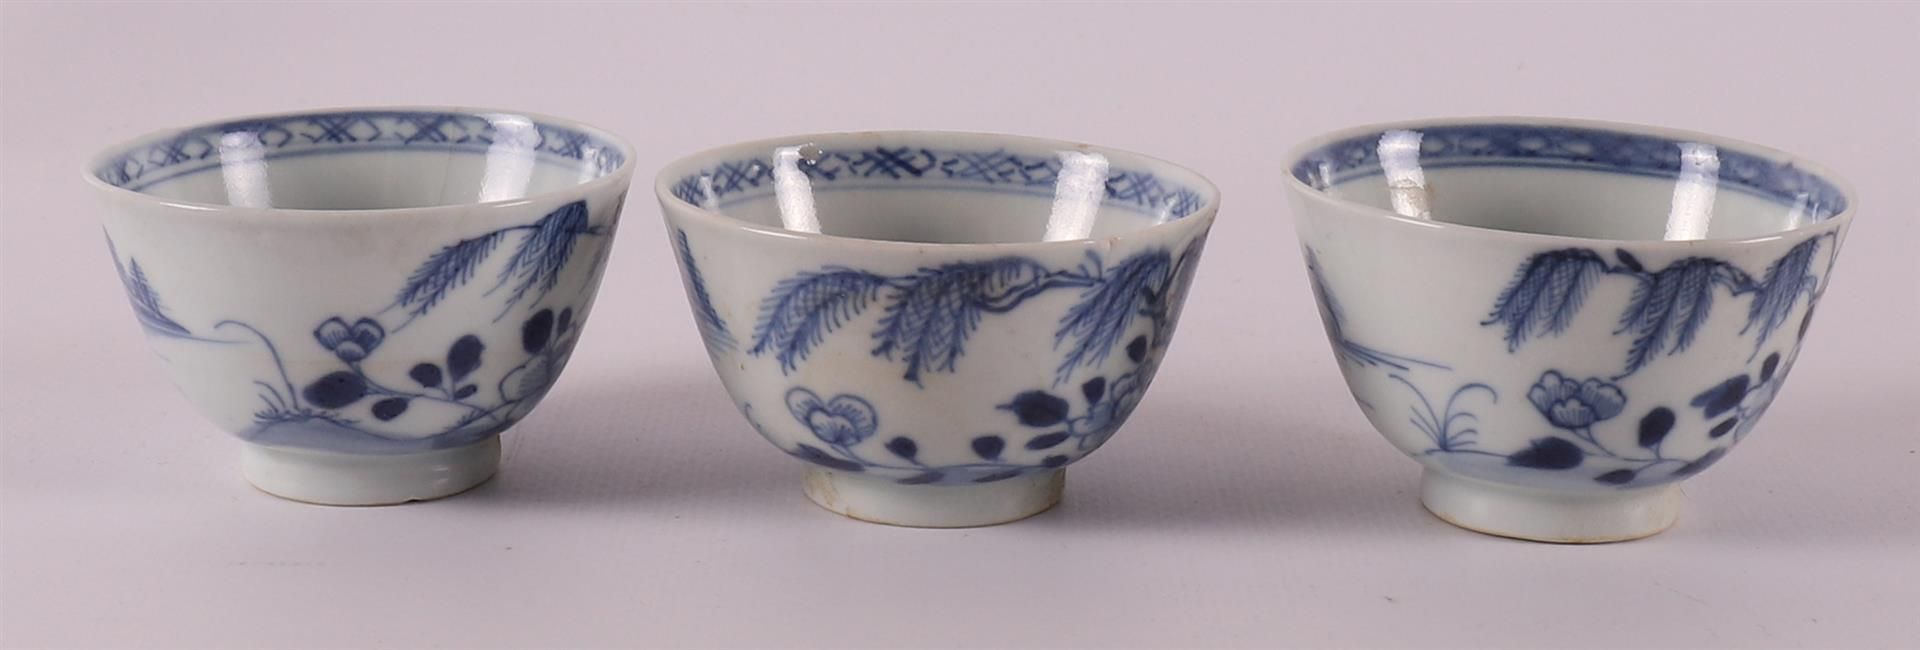 Six blue/white porcelain cups and four saucers, China, Qianlong, 18th century. - Image 11 of 21